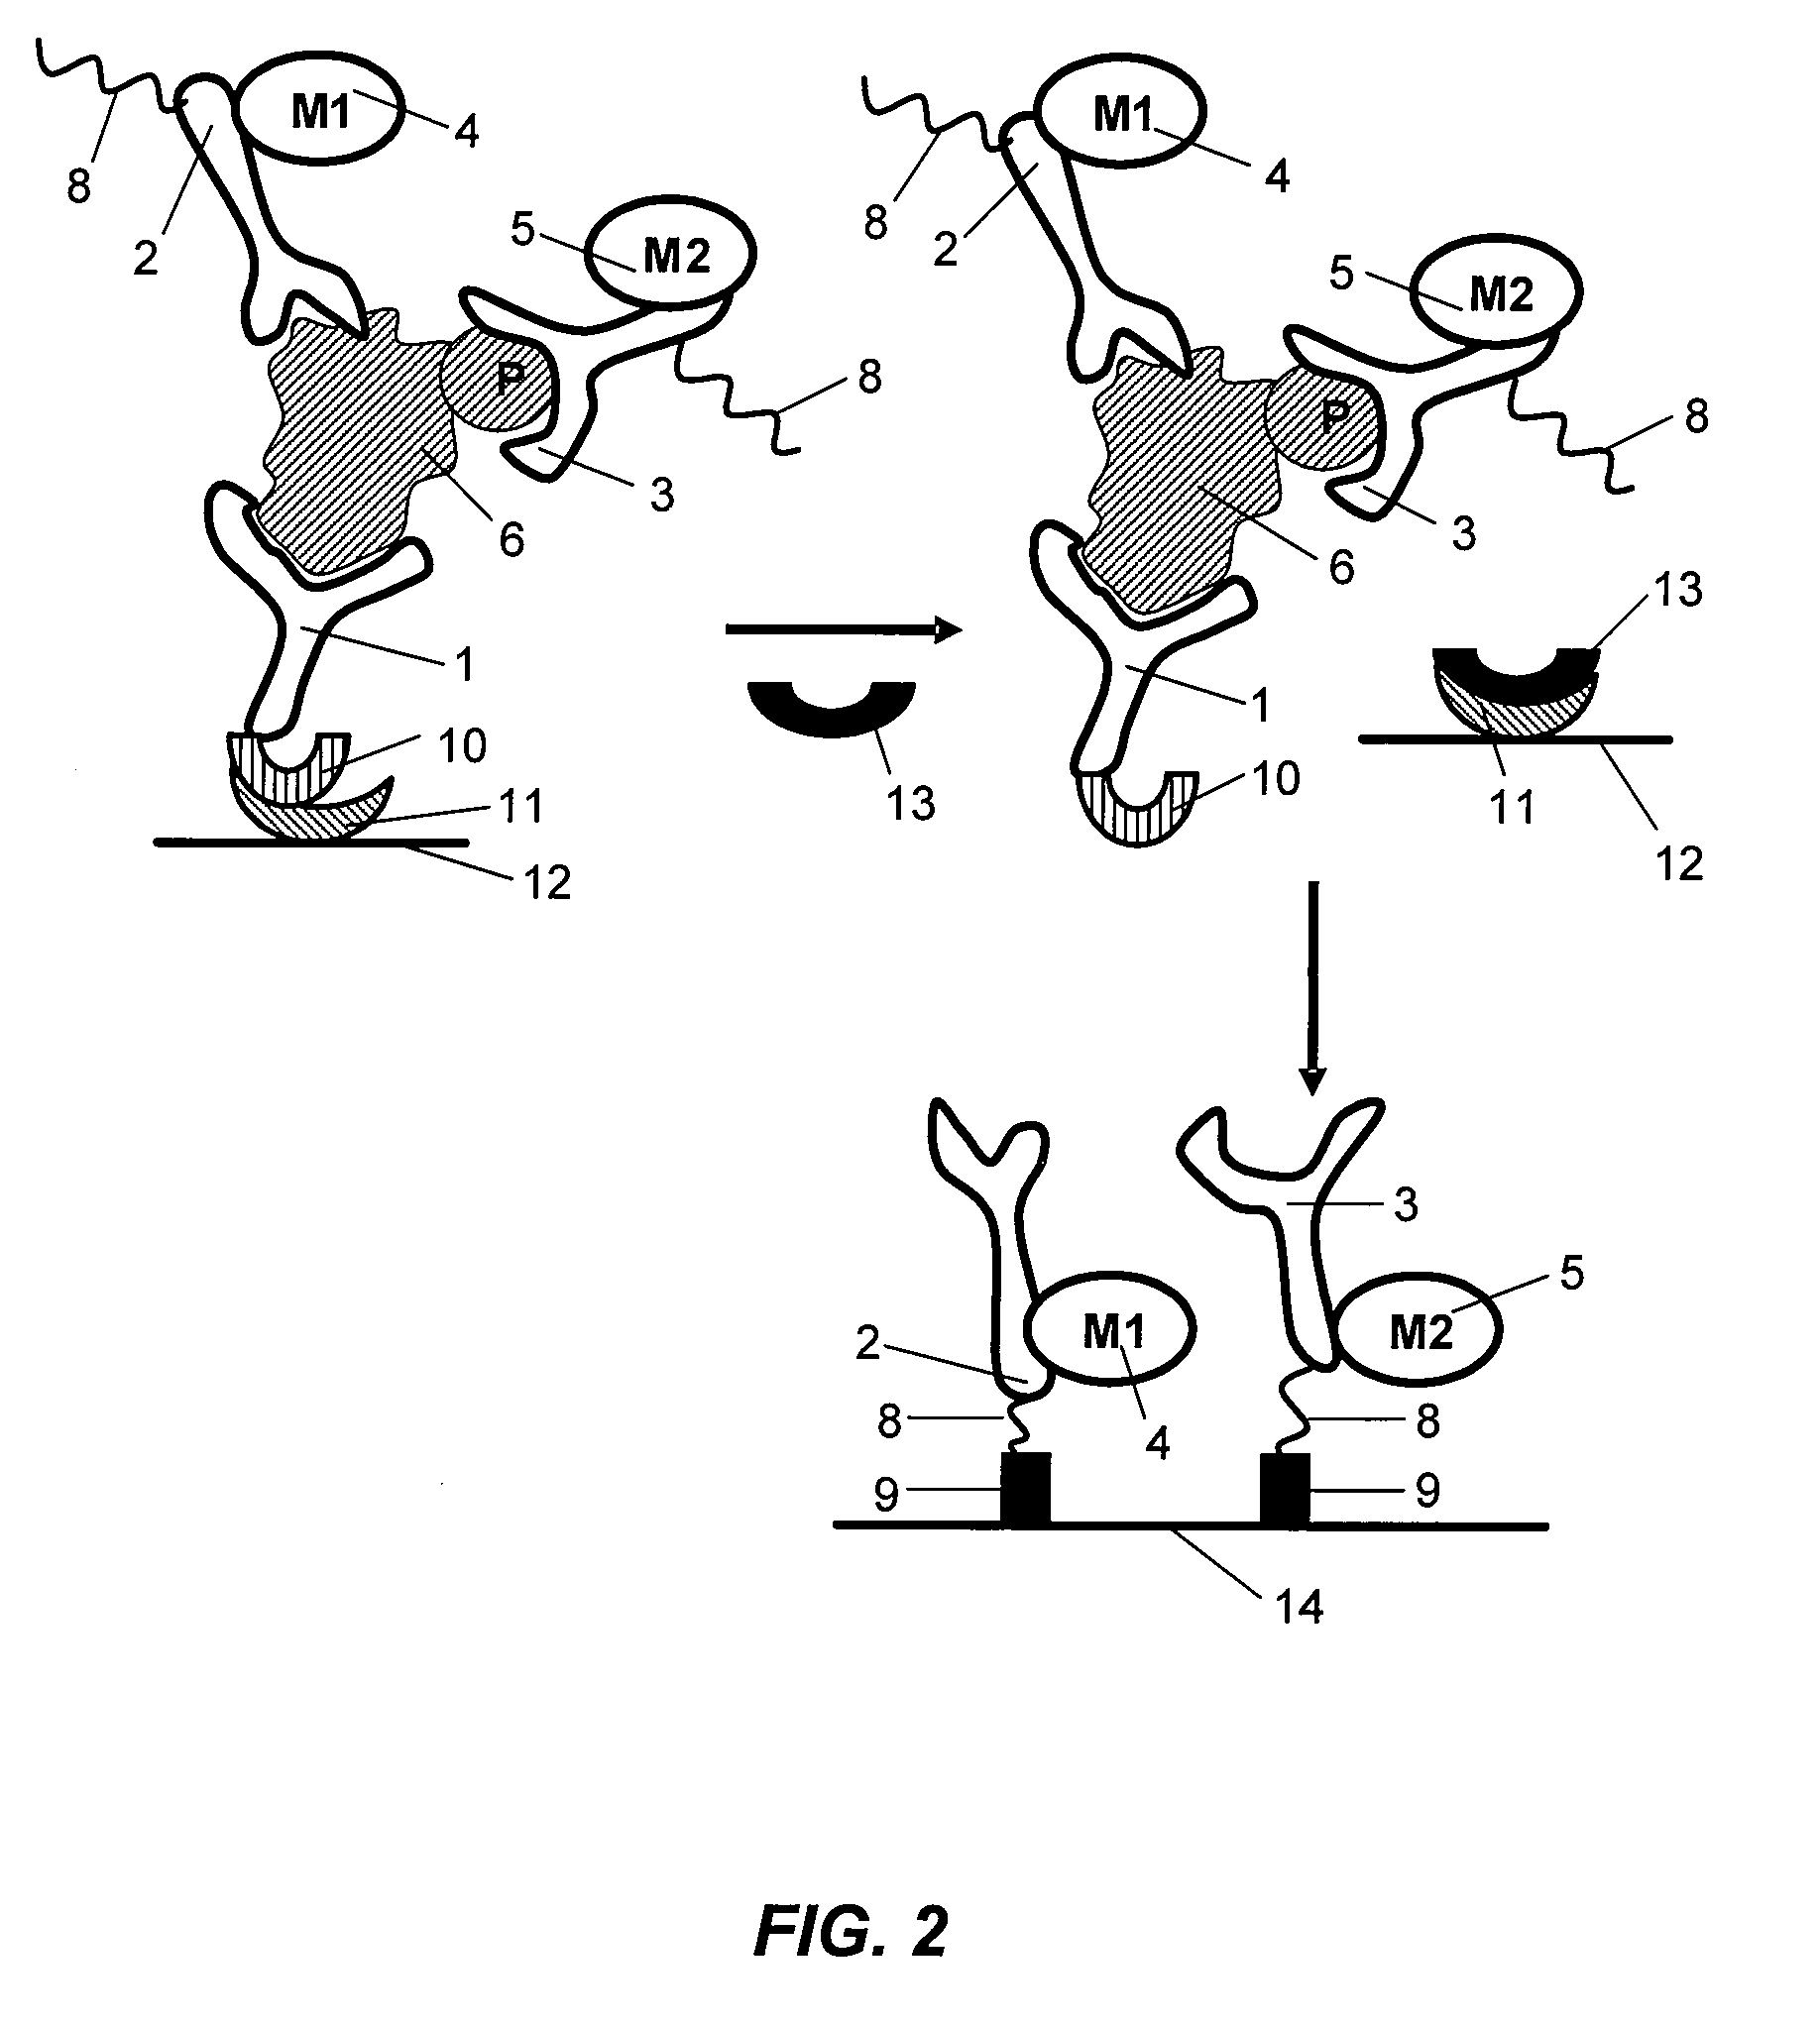 Antibody-based arrays for detecting multiple signal transducers in rare circulating cells